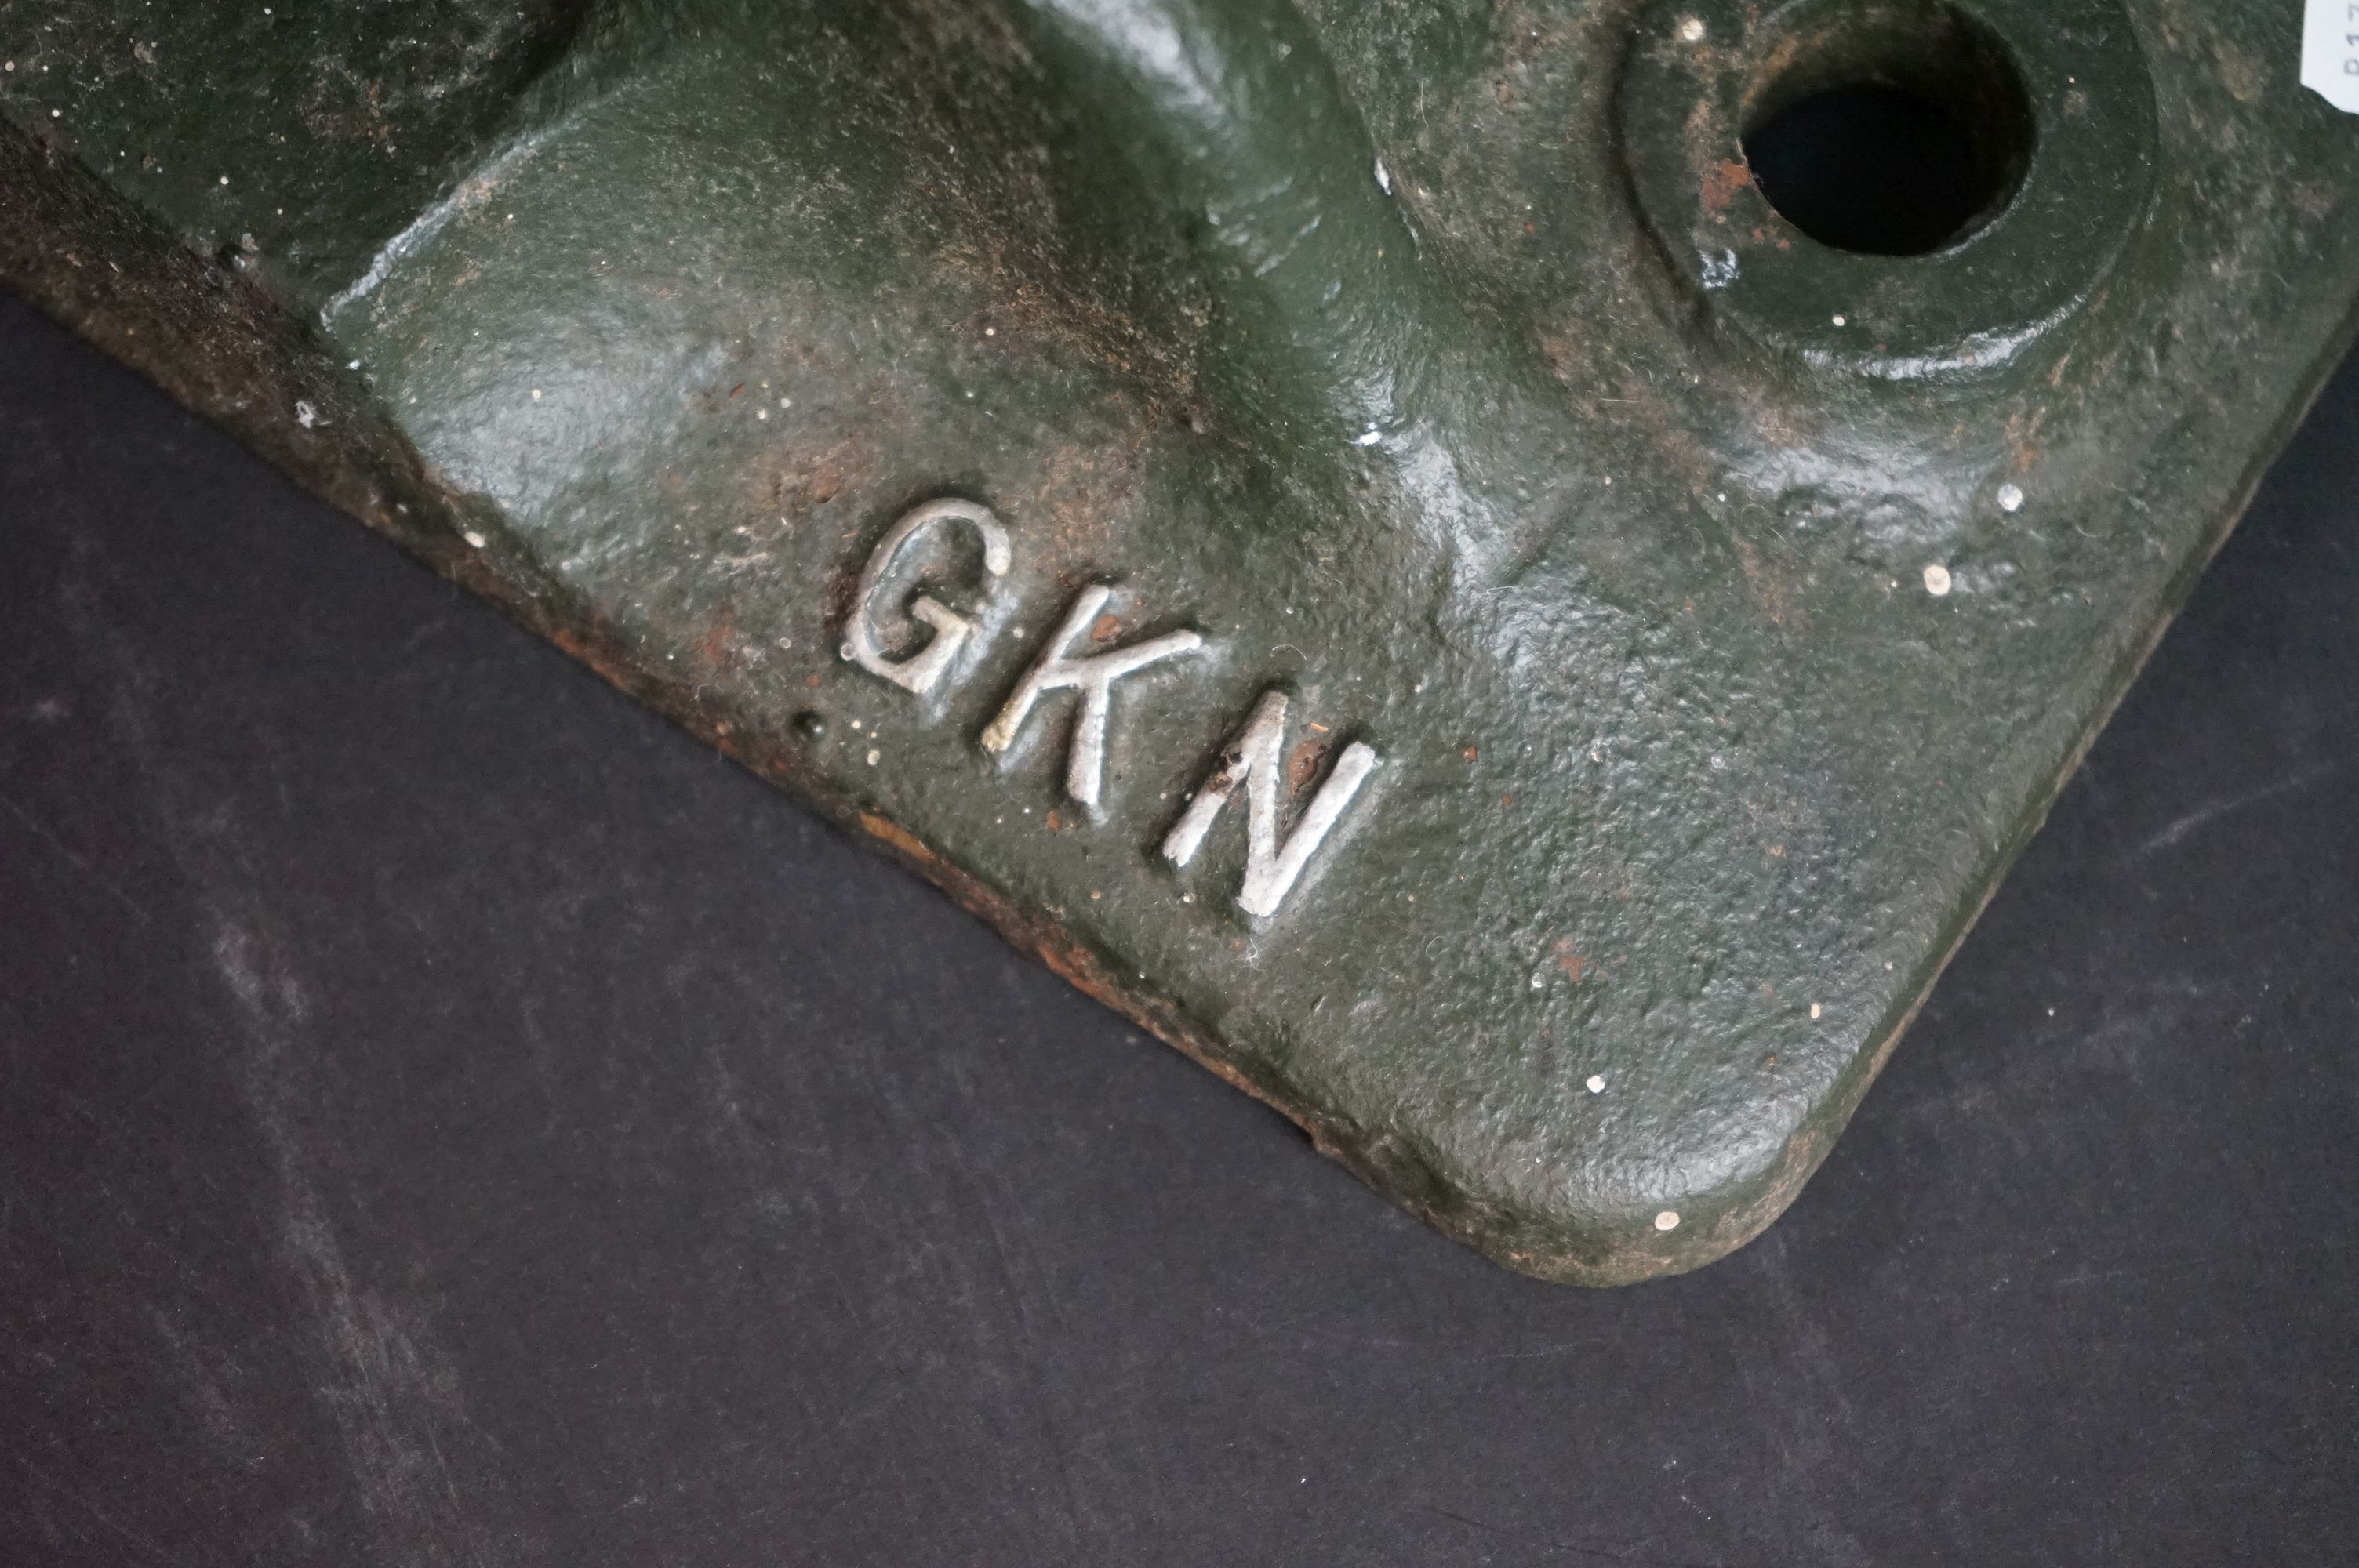 A boot scraper / cleaner made from a GWR Railway track chair. - Image 5 of 6